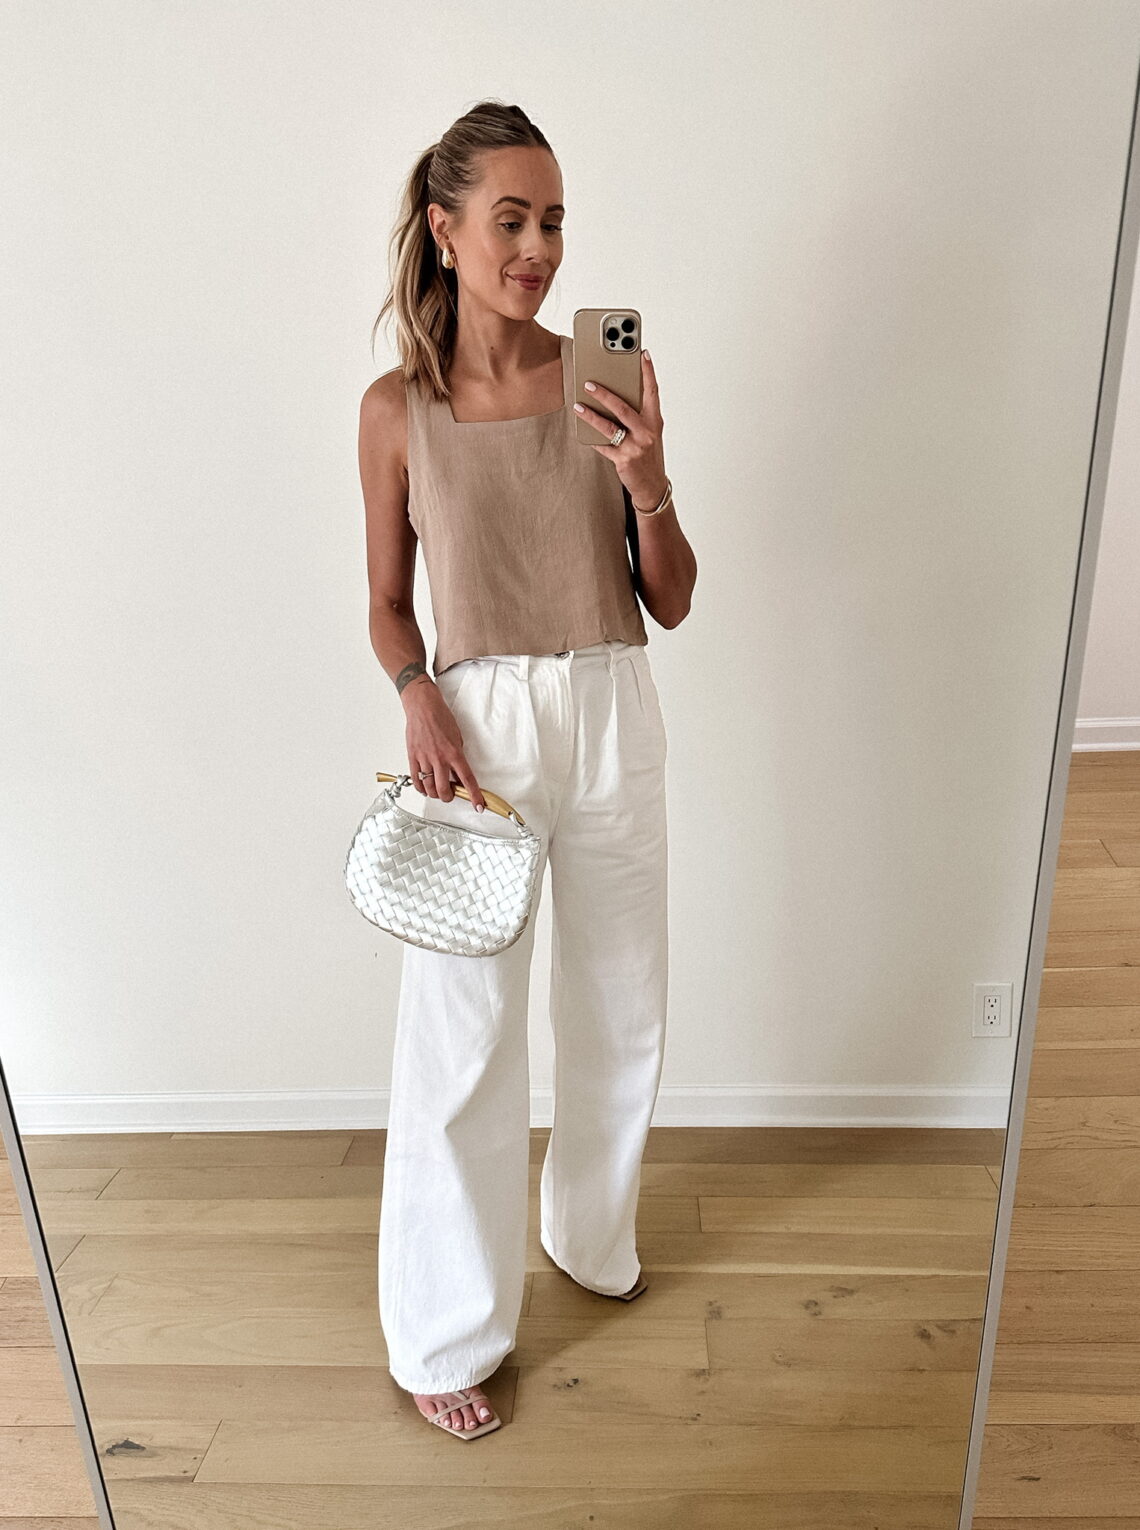 Fashion Jackson Wearing Beige Linen Tank Citizens of Humanity White Trouser Jeans Nude Sandals Metallic Silver Woven Clutch Summer Date Night Outfit